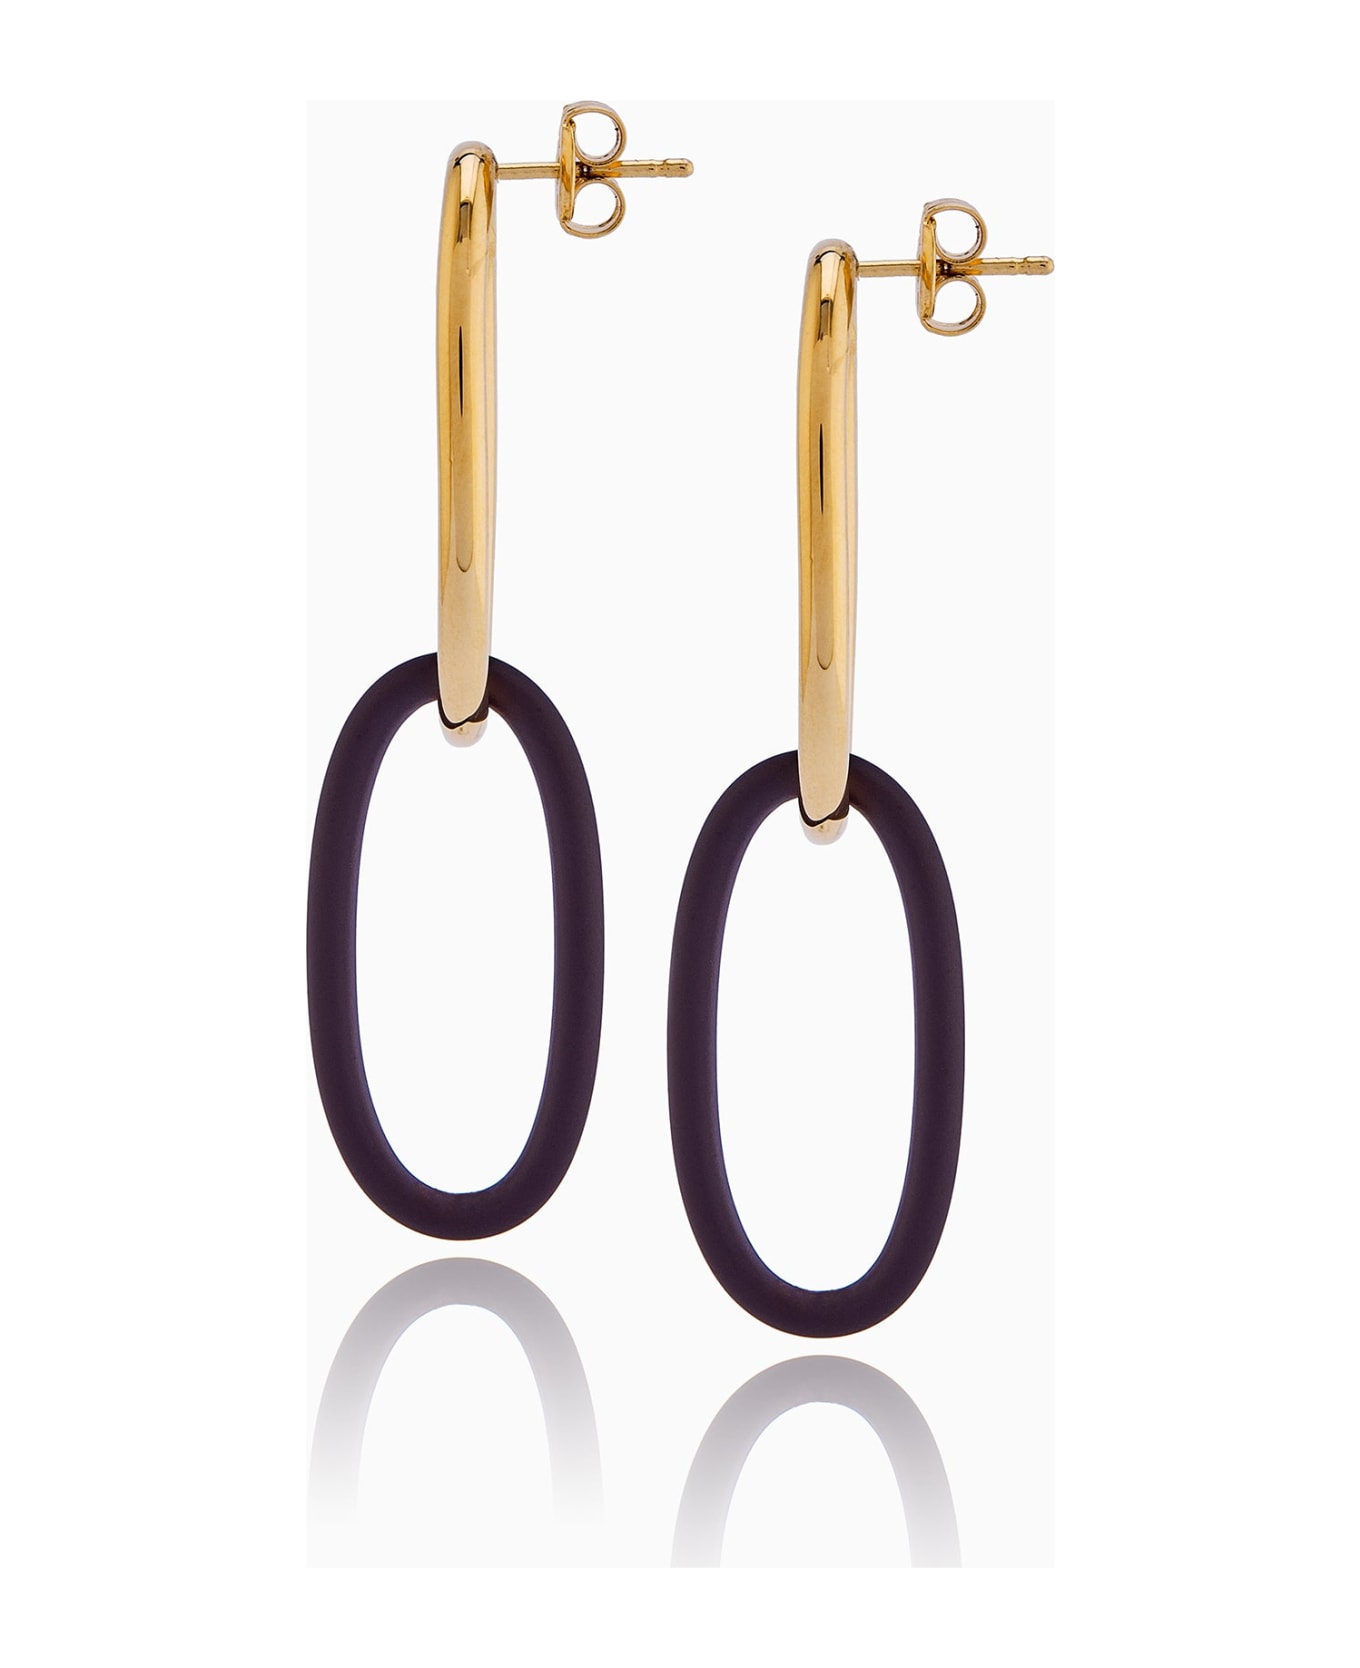 Federica Tosi Earring Bolt Gold Brown - GOLD -BROWN